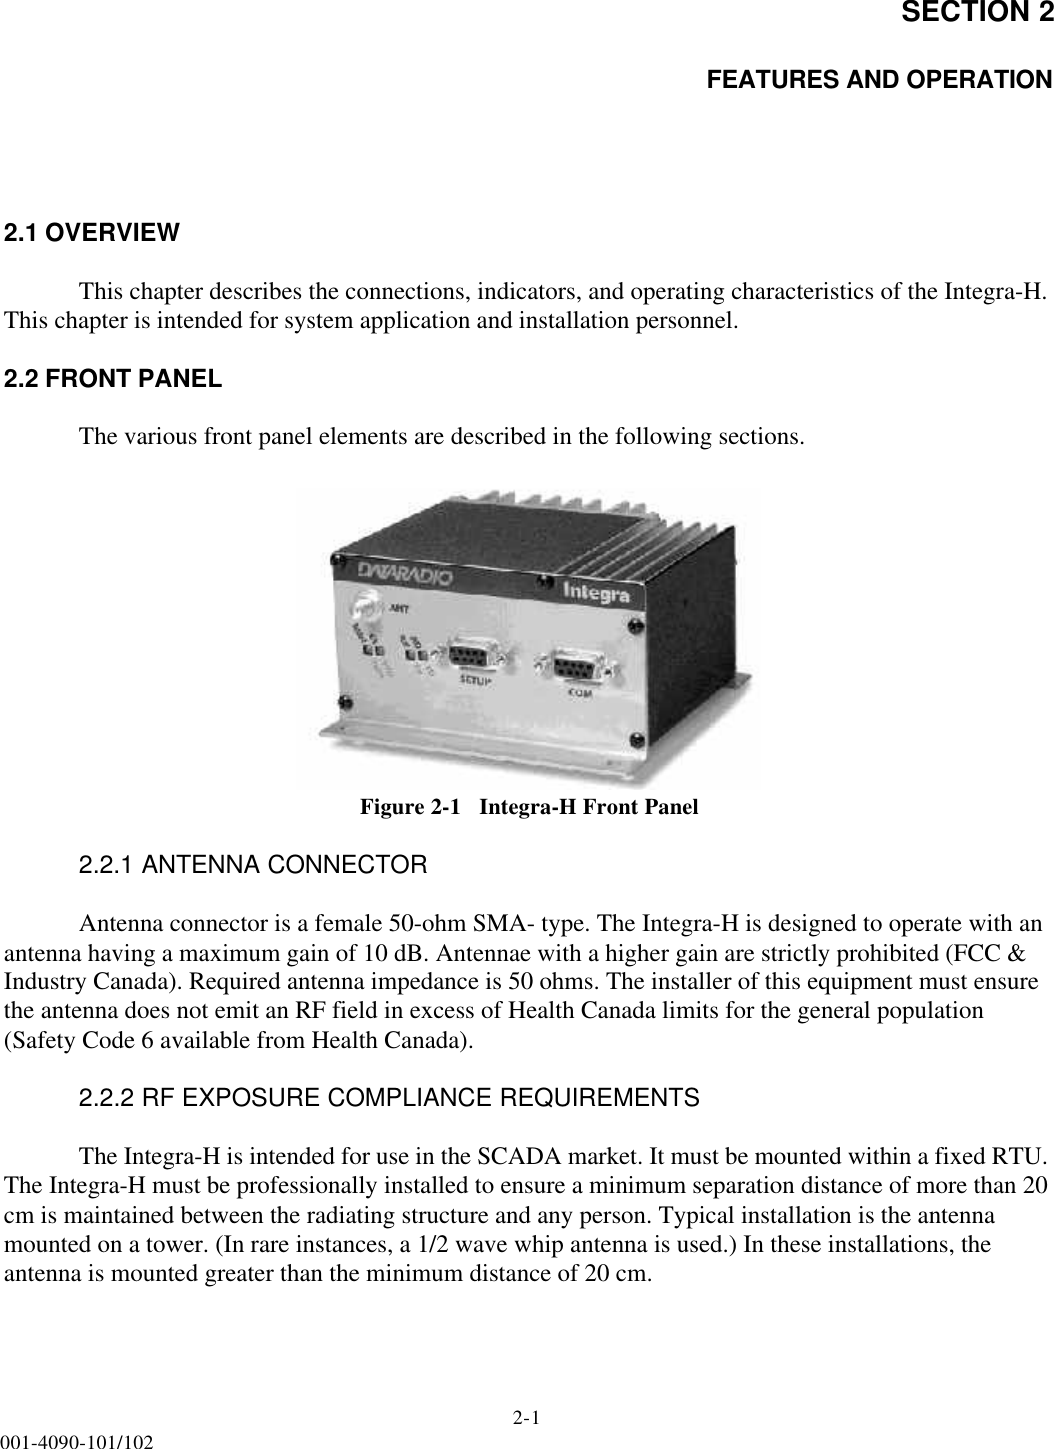 SECTION 22-1001-4090-101/102FEATURES AND OPERATION2.1 OVERVIEWThis chapter describes the connections, indicators, and operating characteristics of the Integra-H. This chapter is intended for system application and installation personnel.2.2 FRONT PANELThe various front panel elements are described in the following sections.Figure 2-1   Integra-H Front Panel2.2.1 ANTENNA CONNECTORAntenna connector is a female 50-ohm SMA- type. The Integra-H is designed to operate with an antenna having a maximum gain of 10 dB. Antennae with a higher gain are strictly prohibited (FCC &amp; Industry Canada). Required antenna impedance is 50 ohms. The installer of this equipment must ensure the antenna does not emit an RF field in excess of Health Canada limits for the general population (Safety Code 6 available from Health Canada).2.2.2 RF EXPOSURE COMPLIANCE REQUIREMENTSThe Integra-H is intended for use in the SCADA market. It must be mounted within a fixed RTU. The Integra-H must be professionally installed to ensure a minimum separation distance of more than 20 cm is maintained between the radiating structure and any person. Typical installation is the antenna mounted on a tower. (In rare instances, a 1/2 wave whip antenna is used.) In these installations, the antenna is mounted greater than the minimum distance of 20 cm. 